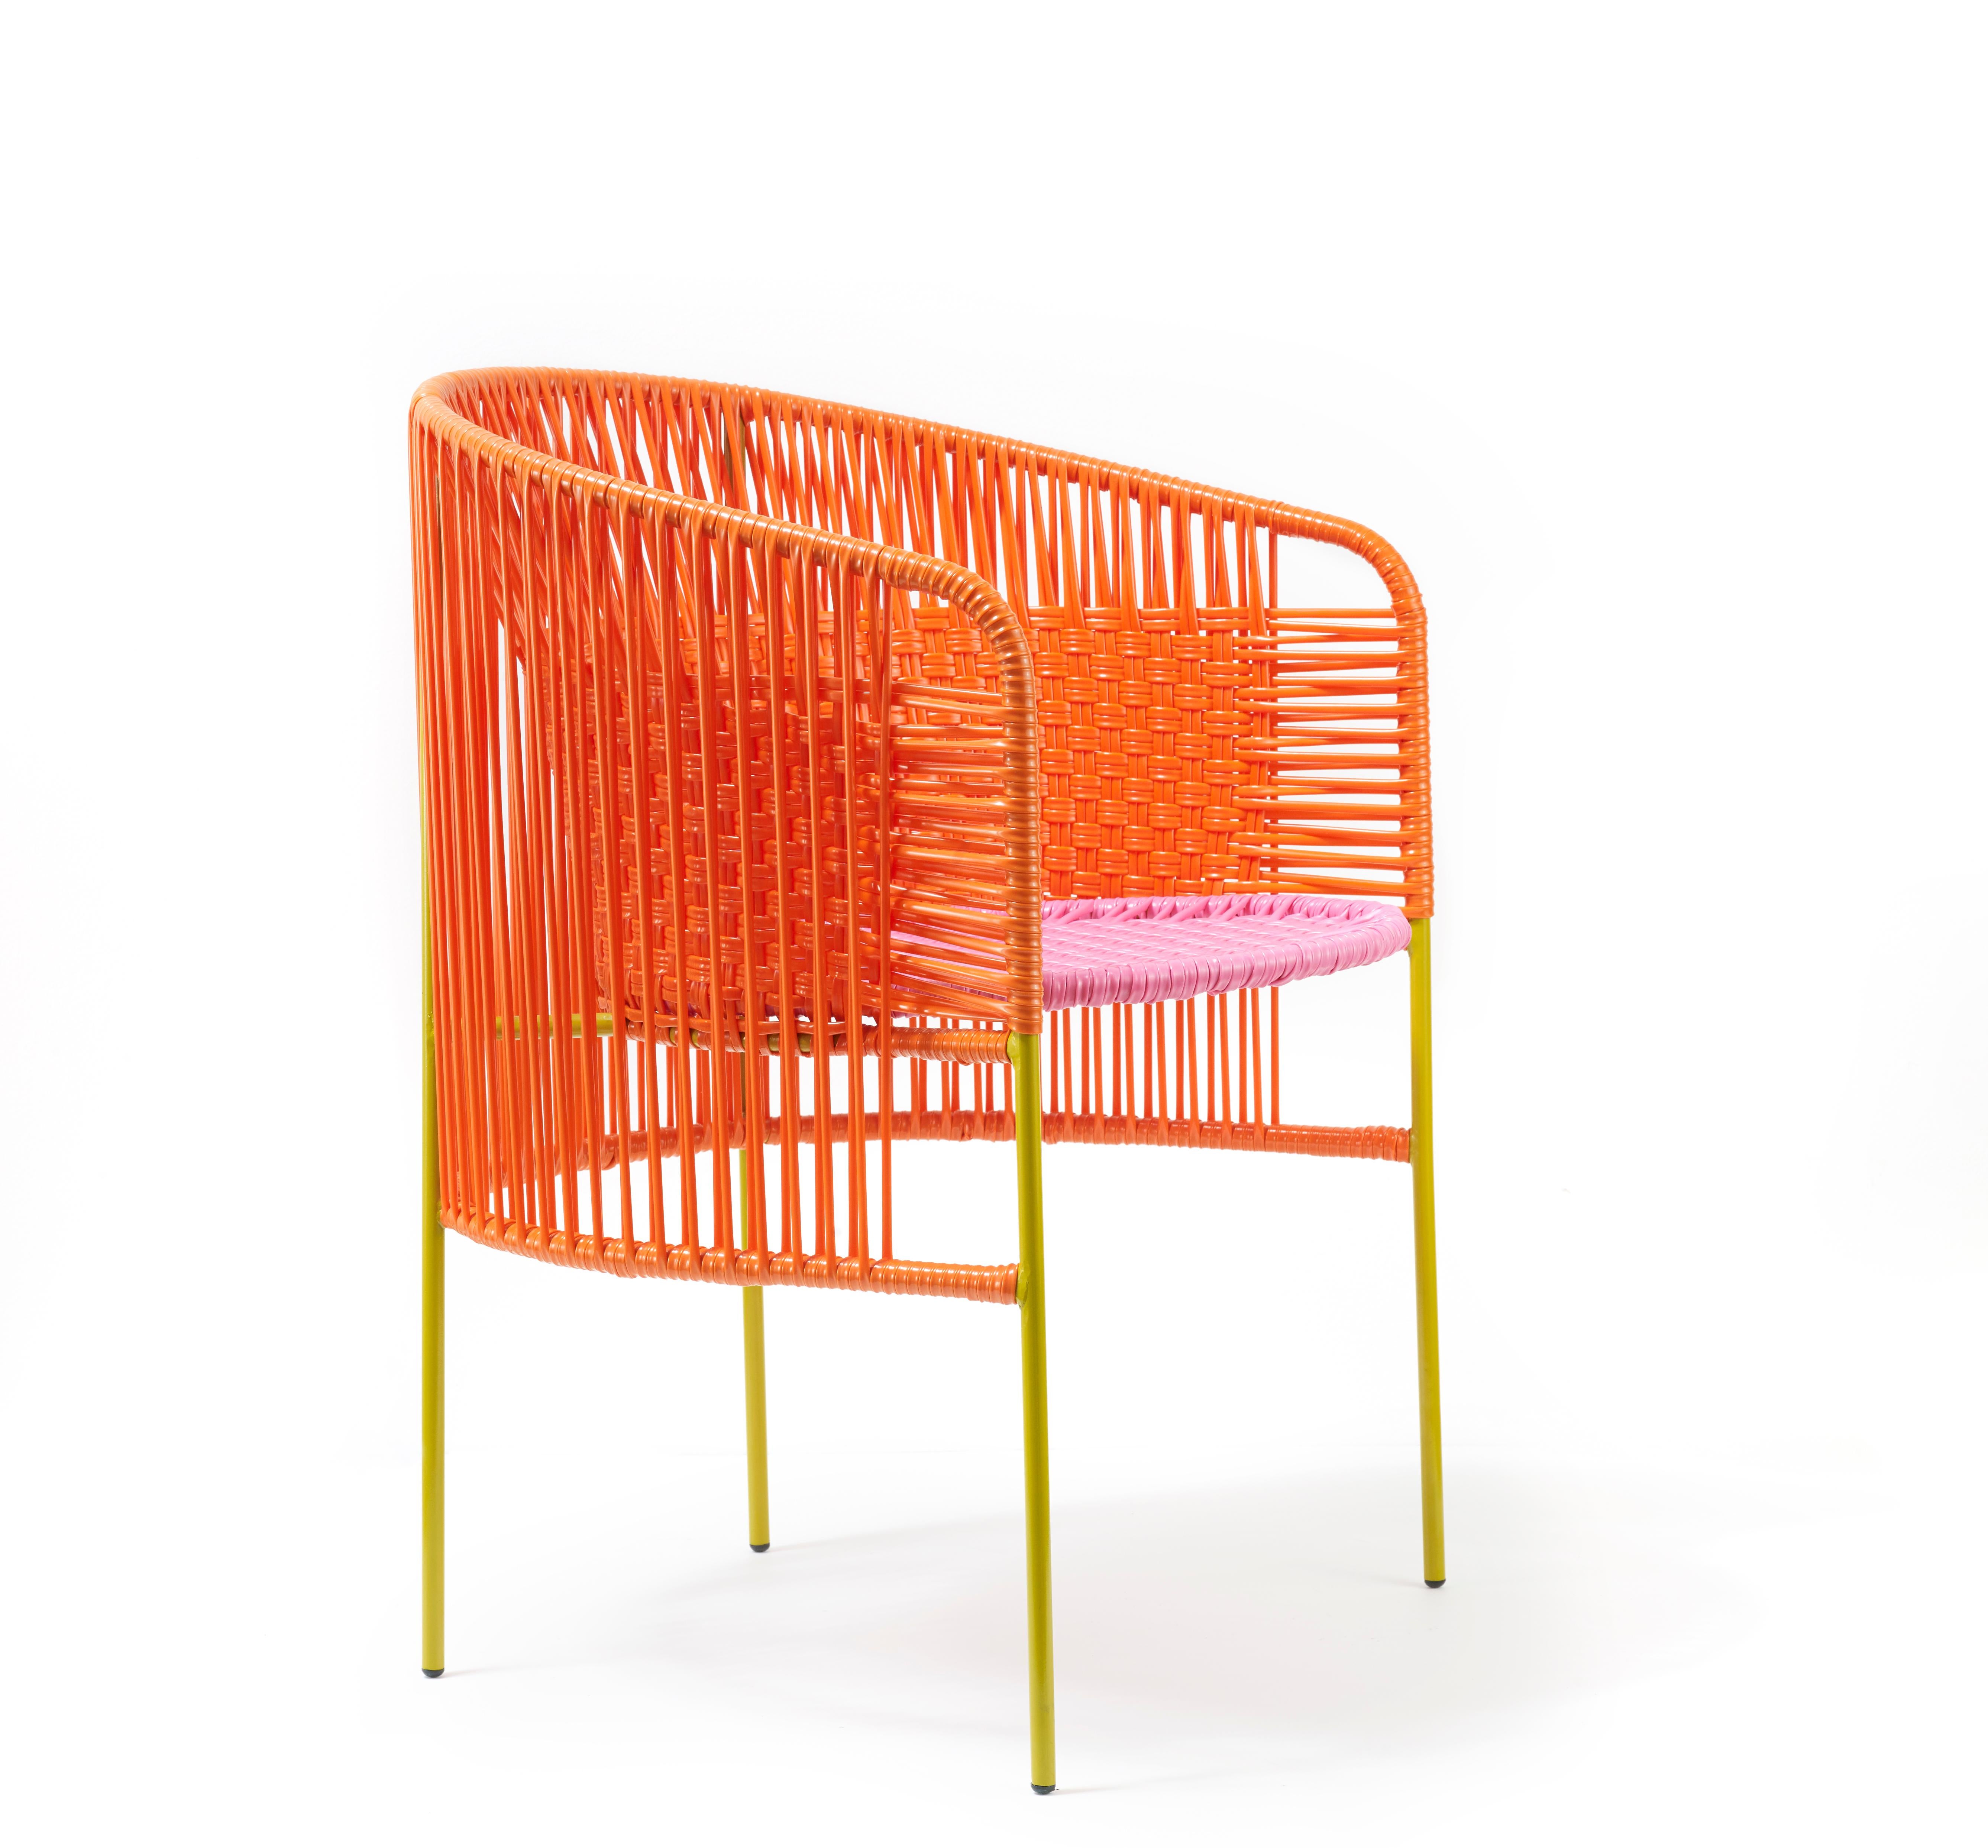 Orange rose caribe dining chair by Sebastian Herkner
Materials: Galvanized and powder-coated tubular steel. PVC strings are made from recycled plastic.
Technique: Made from recycled plastic and weaved by local craftspeople in Colombia.